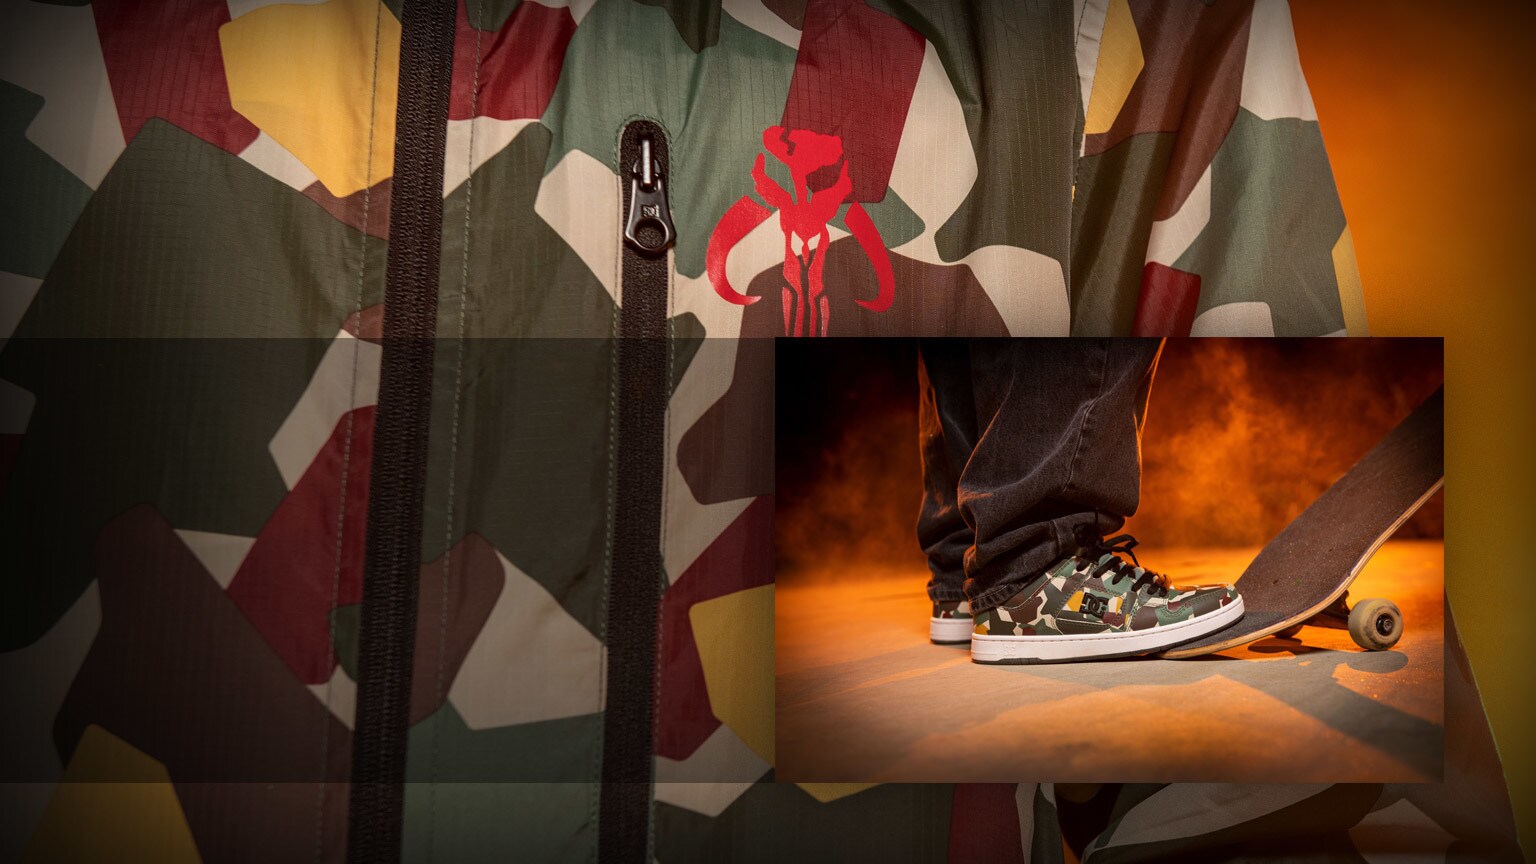 DC Shoes Collects the Bounty on a New Boba Fett Capsule Collection – Reveal